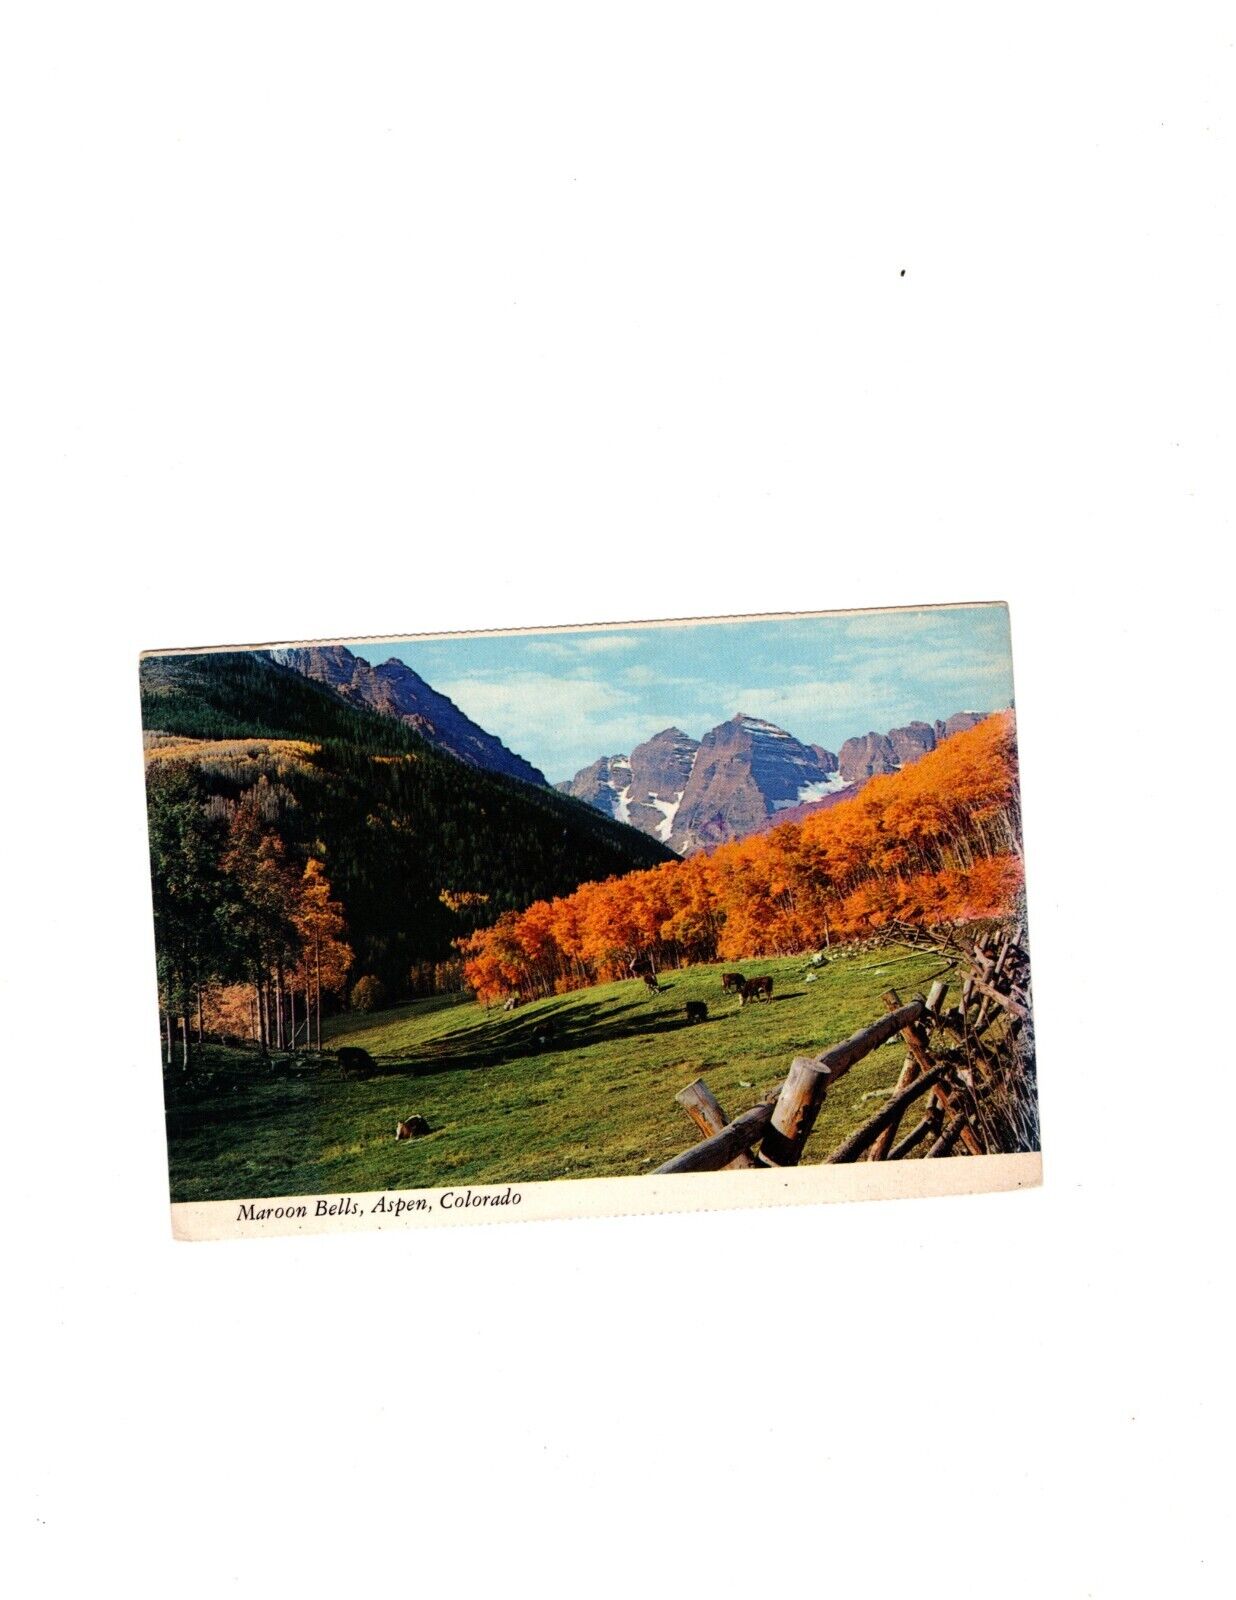 Maroon Bells Aspen Colorado Mountains Trees Cows  PC Posted Color Postcard 1975